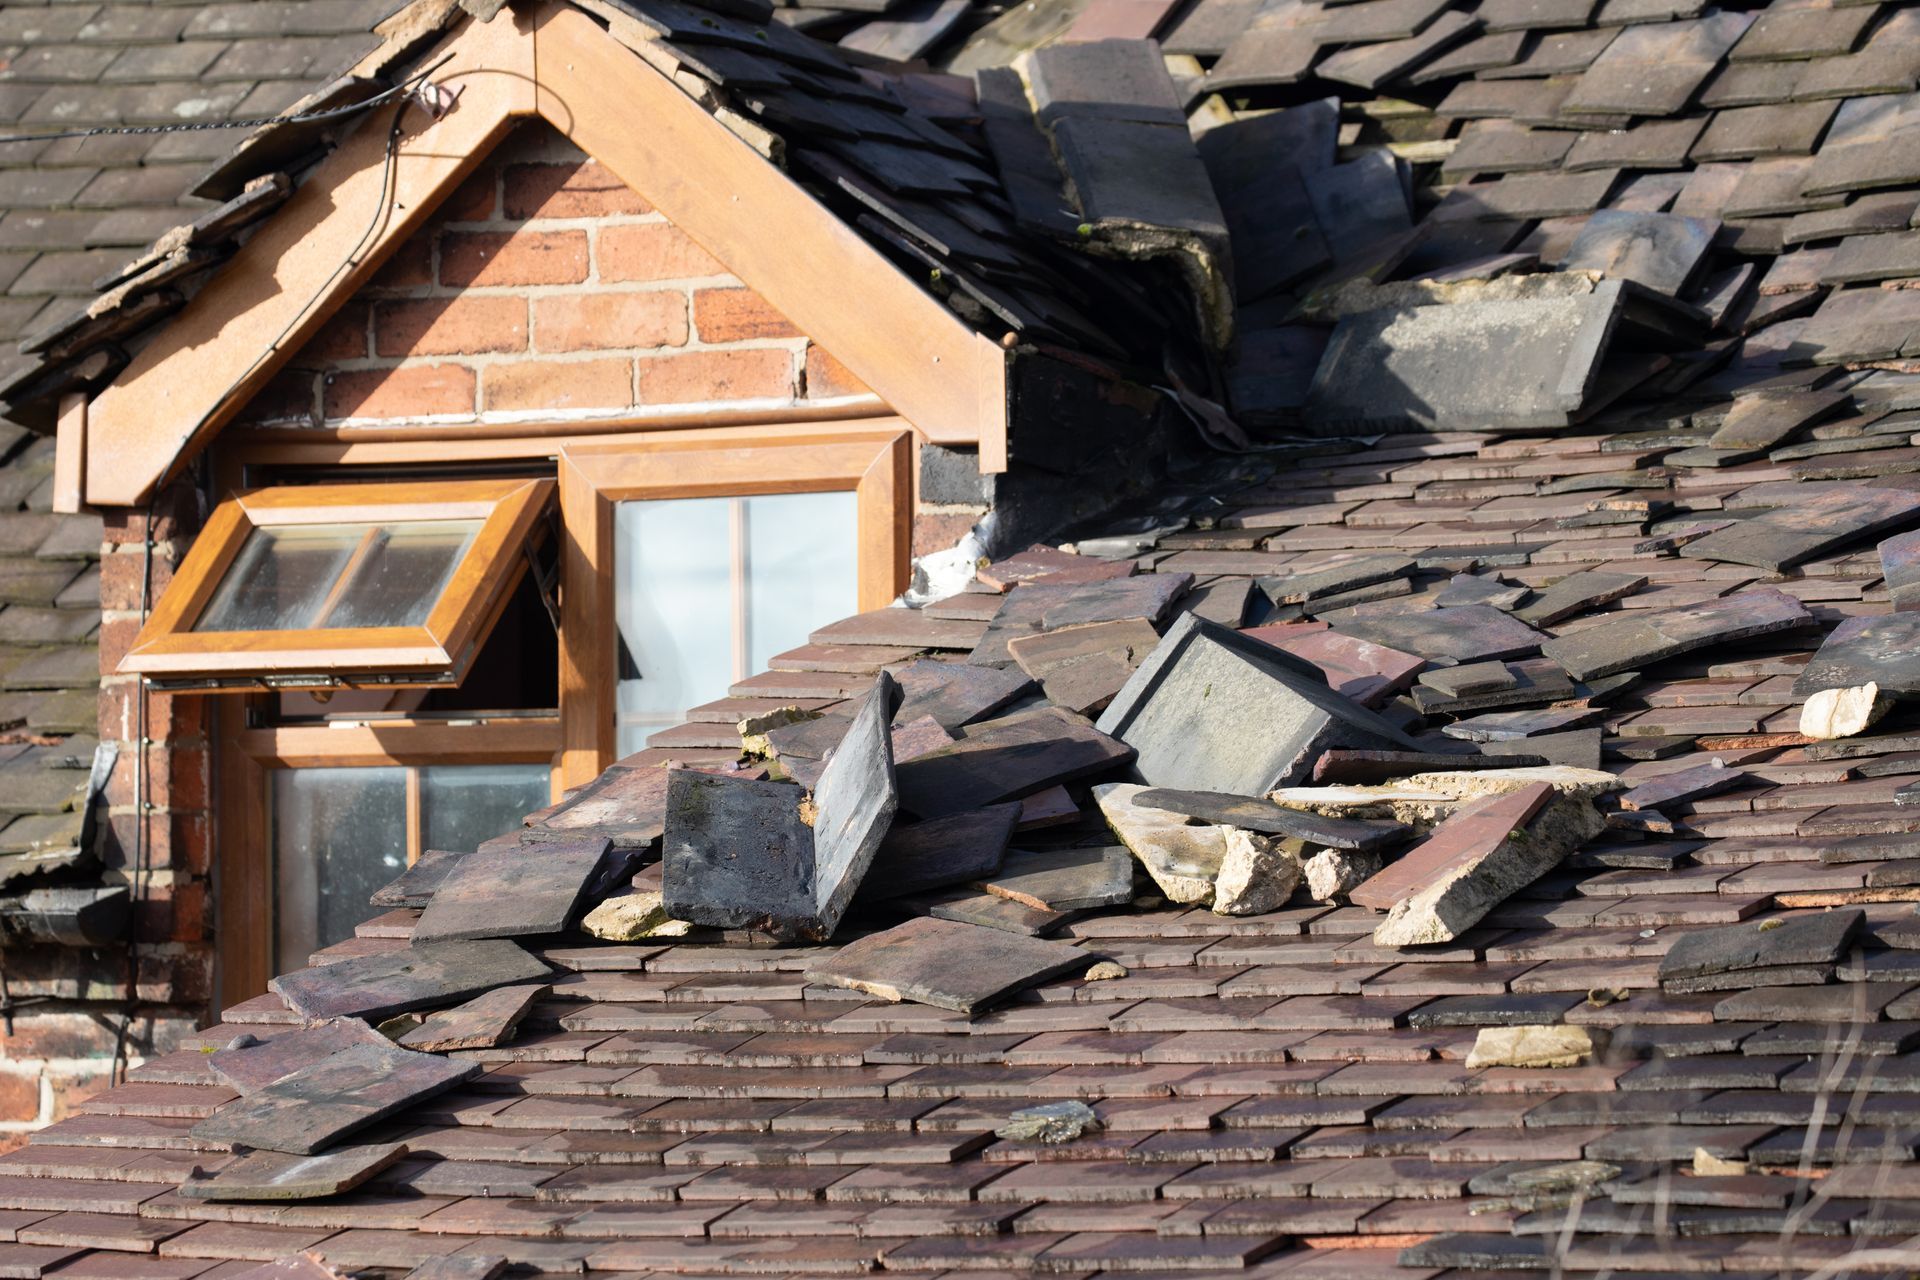 Damaged roofing